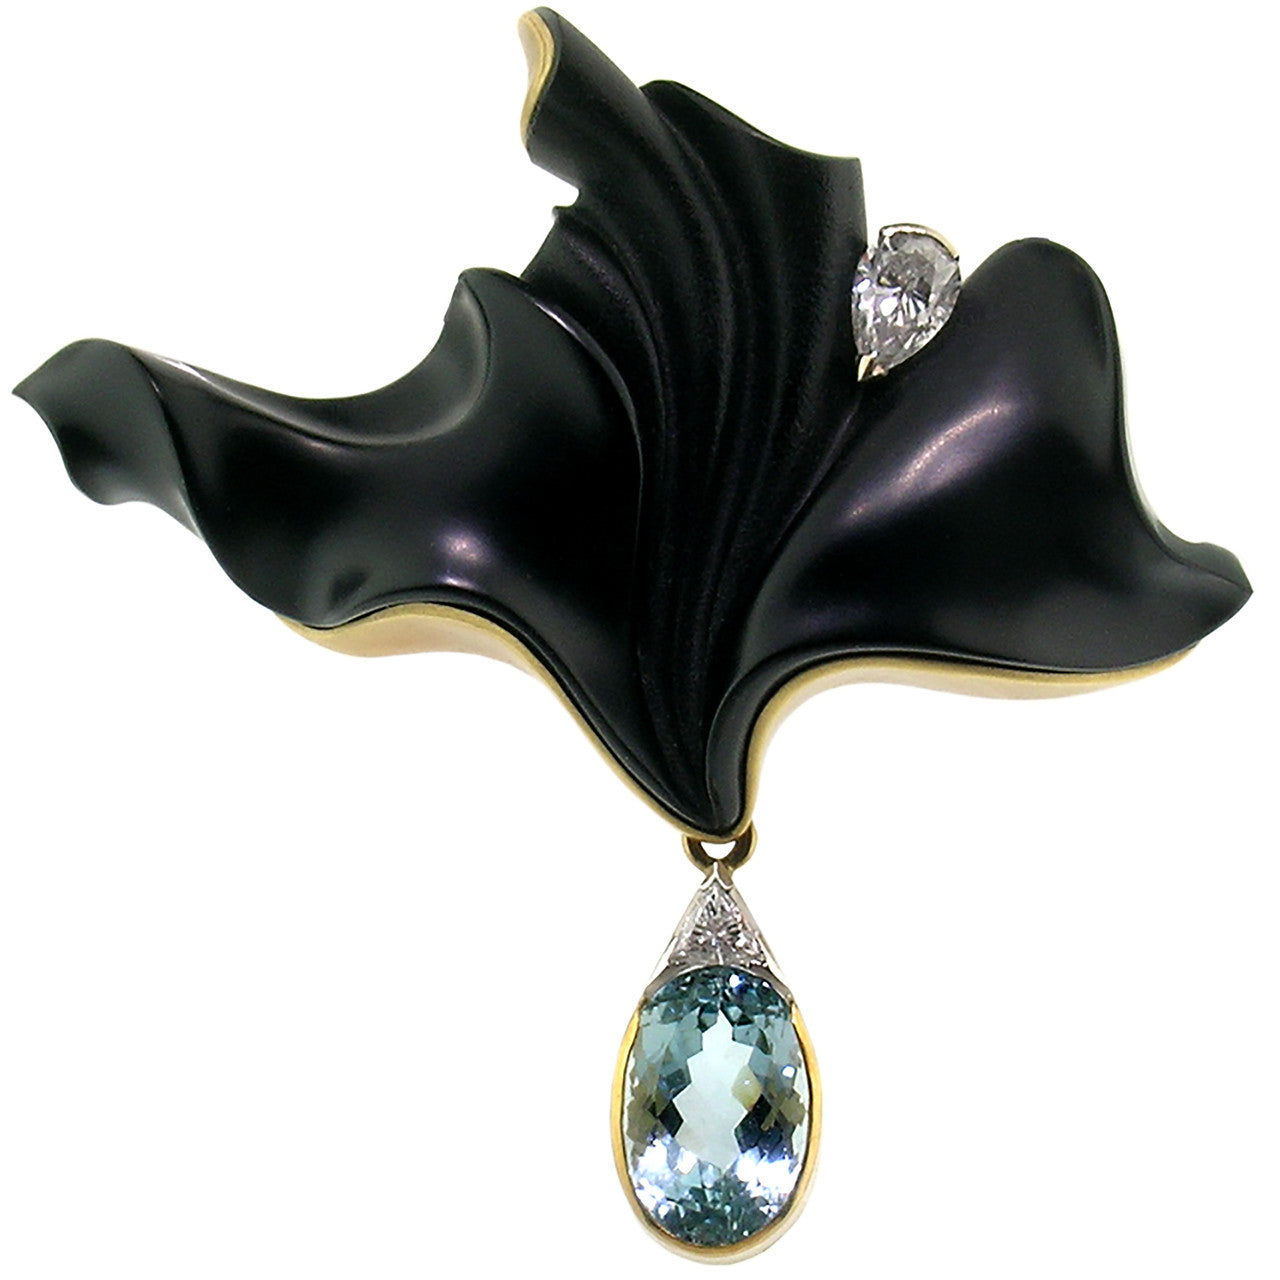 Steve Walters Carved Chalcedony and Aquamarine 18kt Pendant & Brooch made in USA by ART Guyon for Cynthia Scott Jewelry